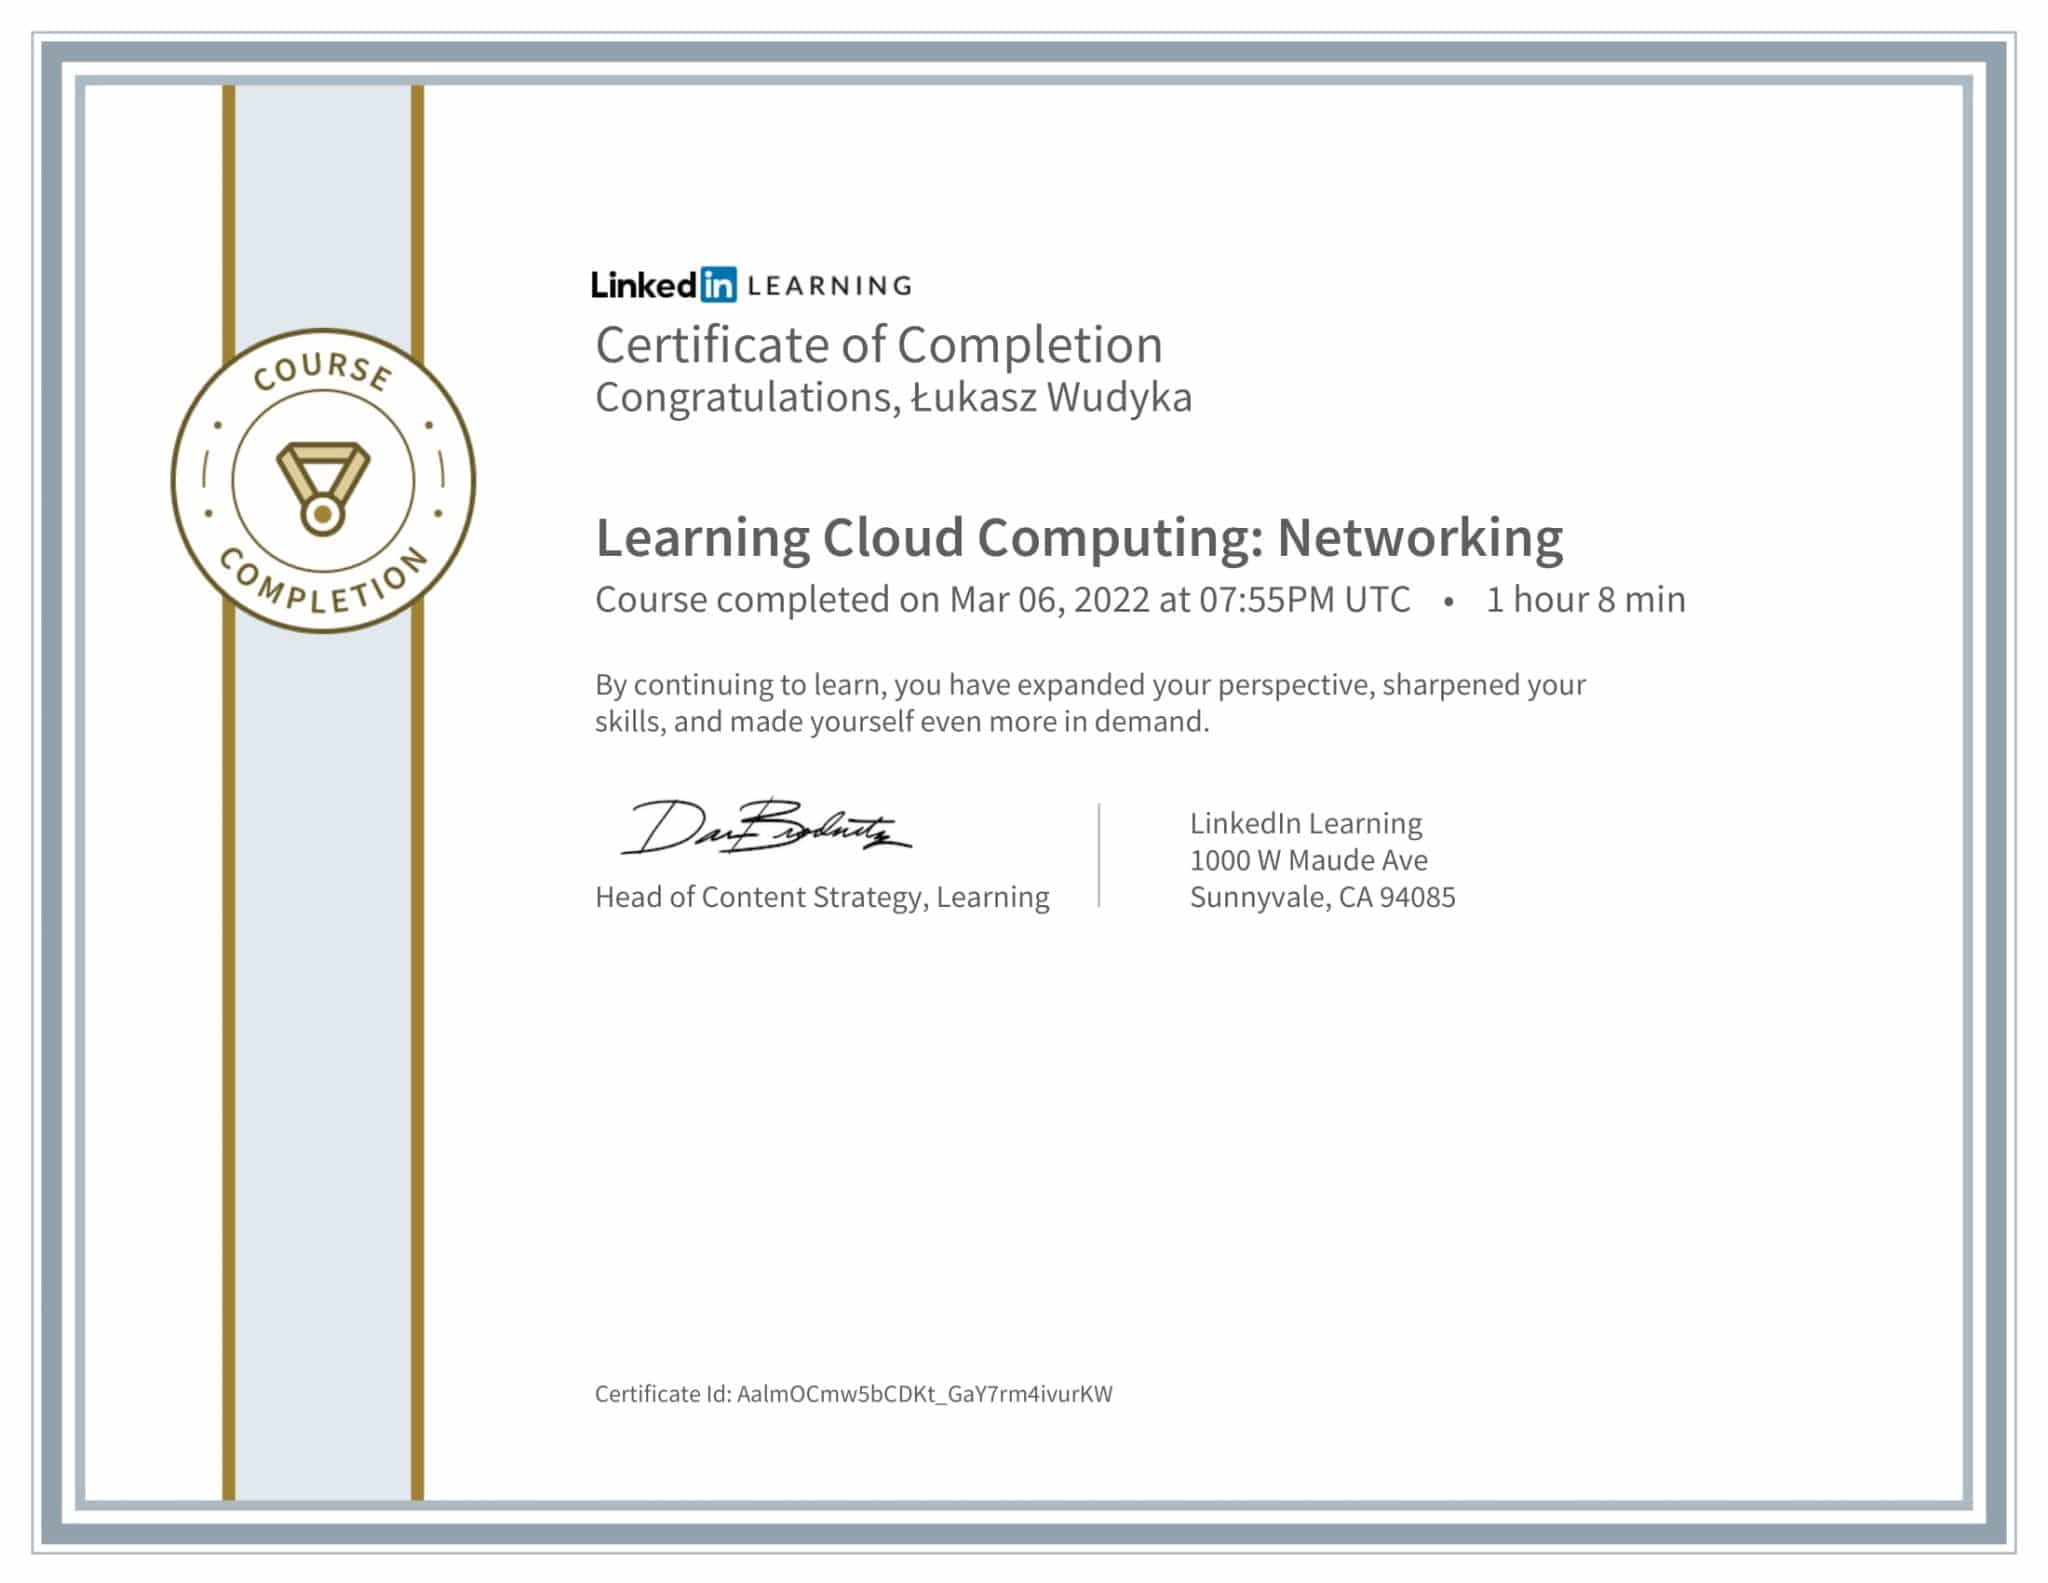 CertificateOfCompletion_Learning Cloud Computing Networking-1